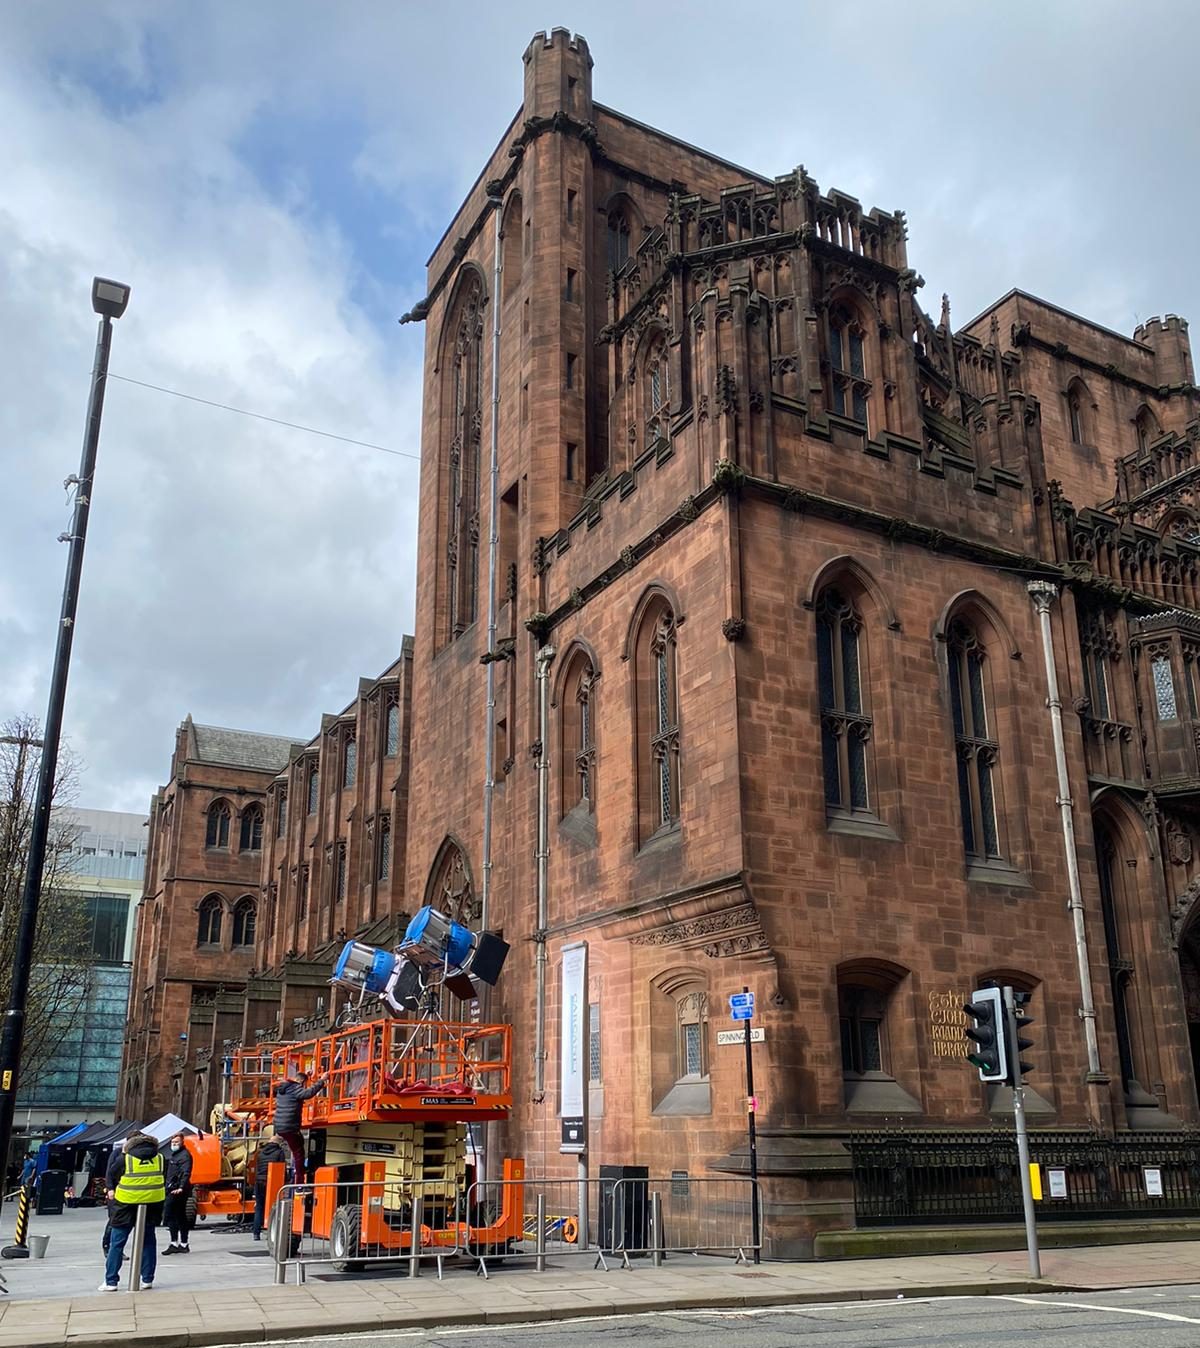 Netflix is currently filming a new series inside John Rylands Library on Deansgate, The Manc